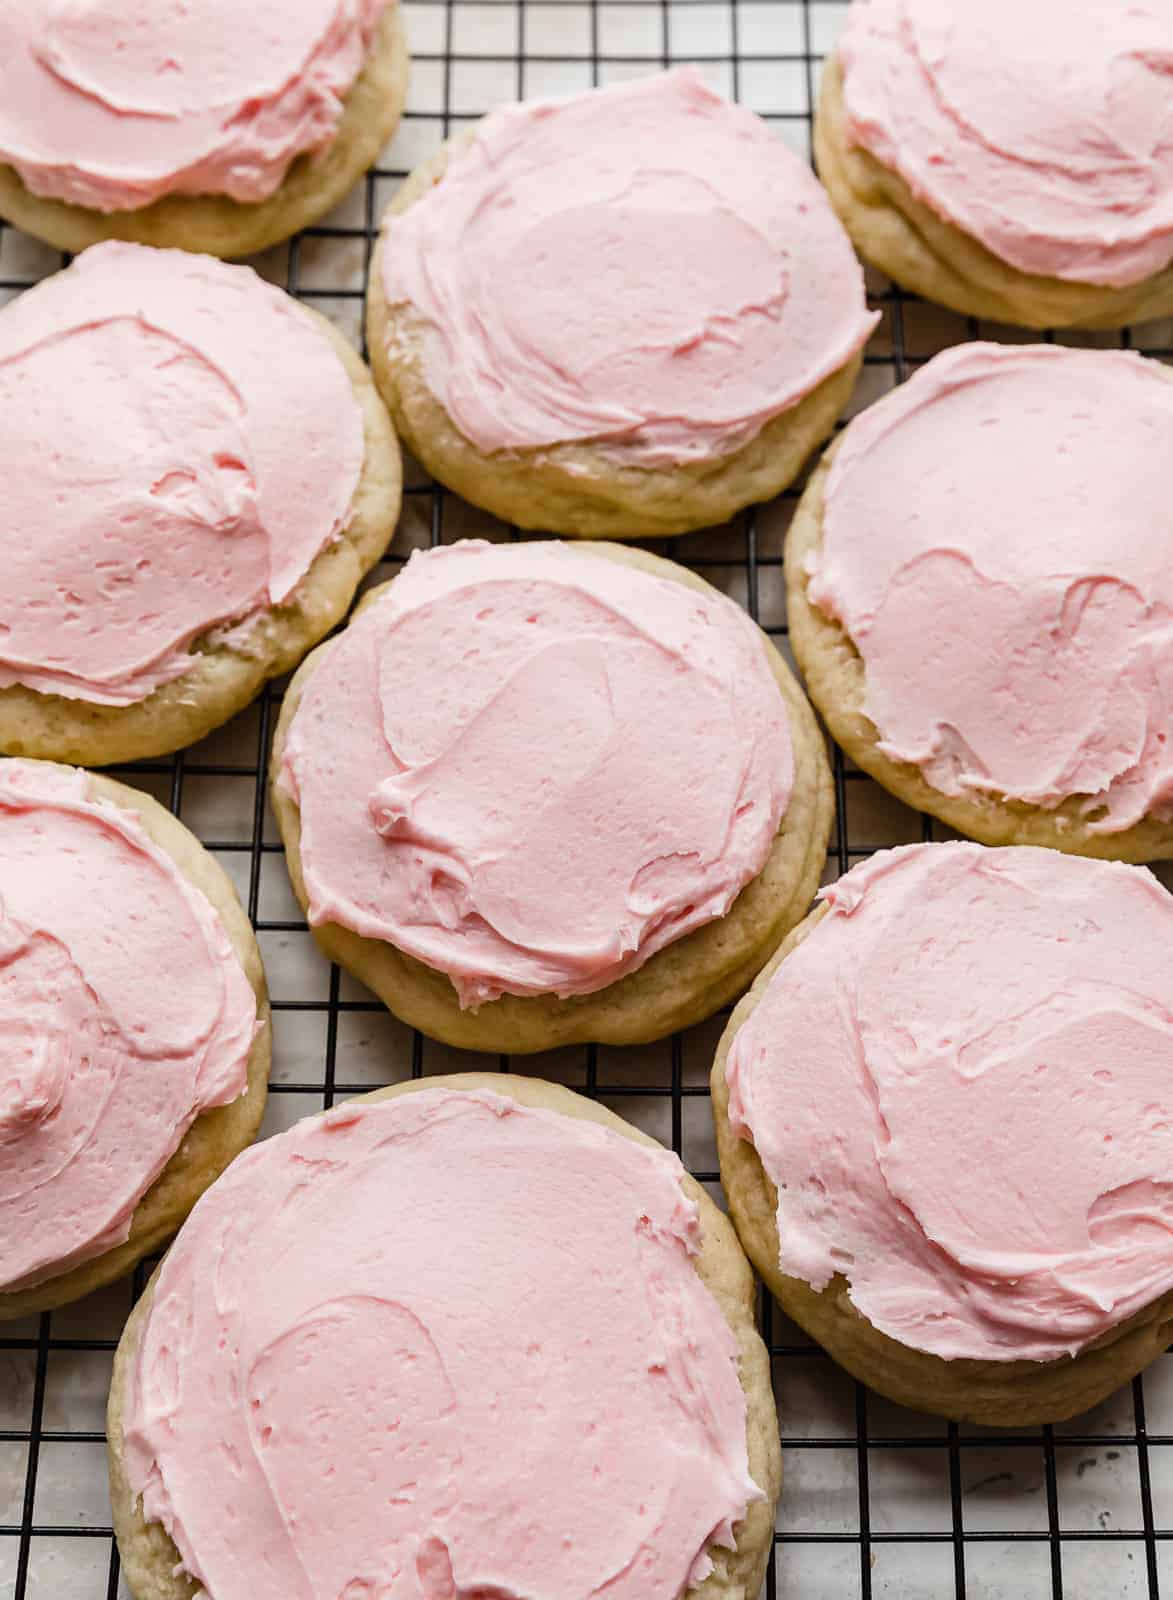 Copycat Crumbl Sugar Cookies topped with a pink frosting, on a black wire cooling rack.